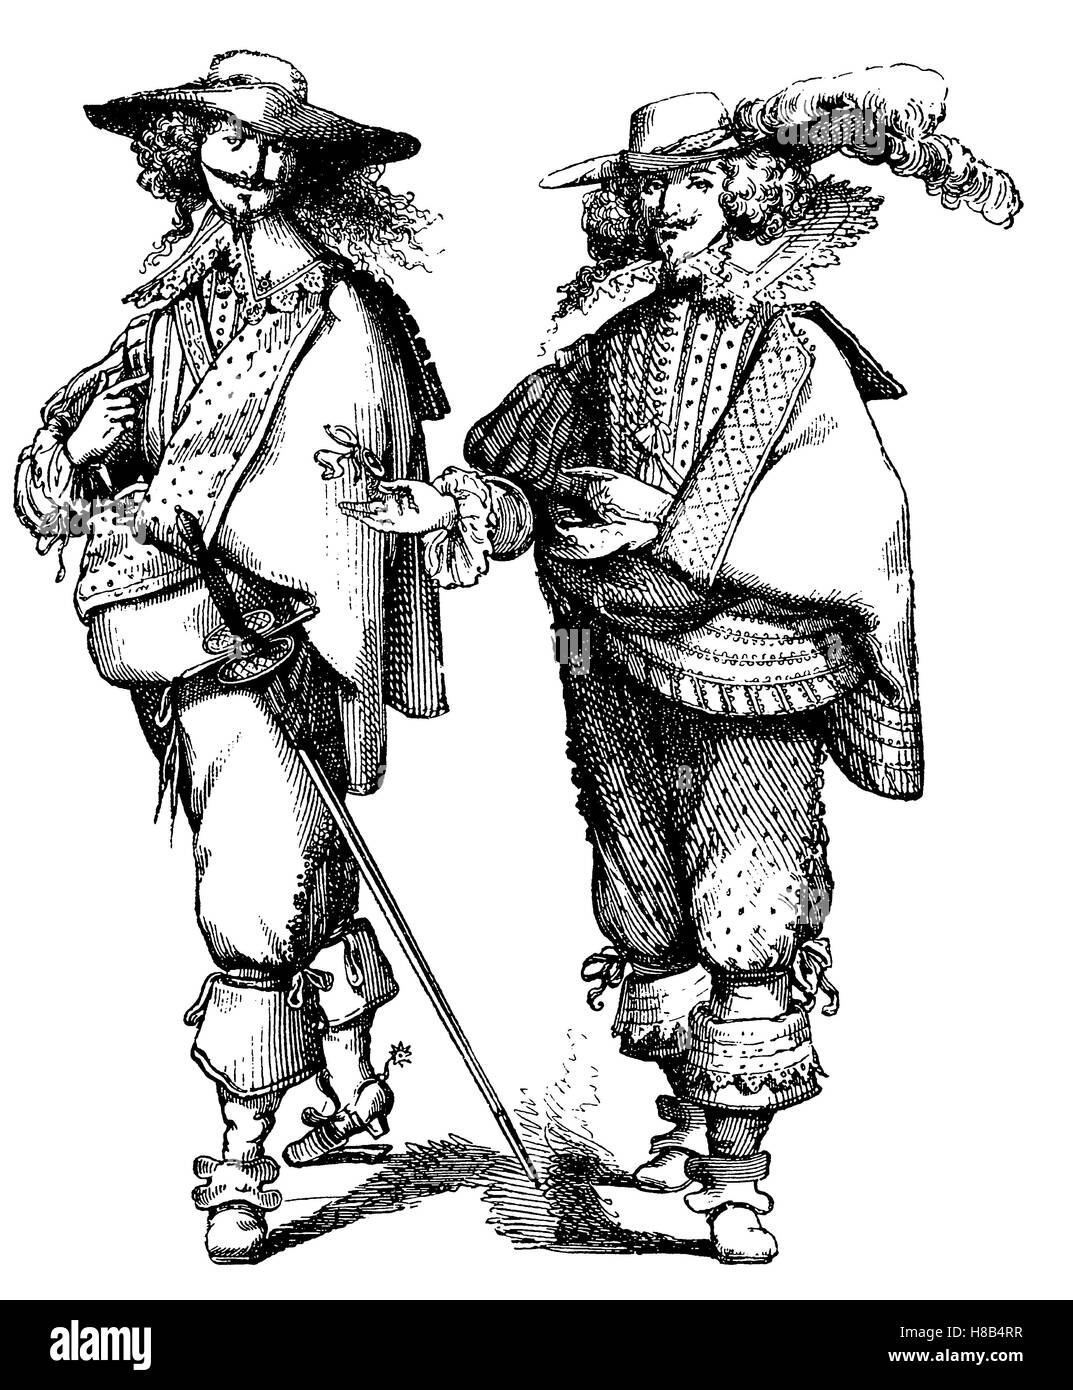 noble french men in the year 1628, with long hair and a Henri-quatre, History of fashion, costume story Stock Photo